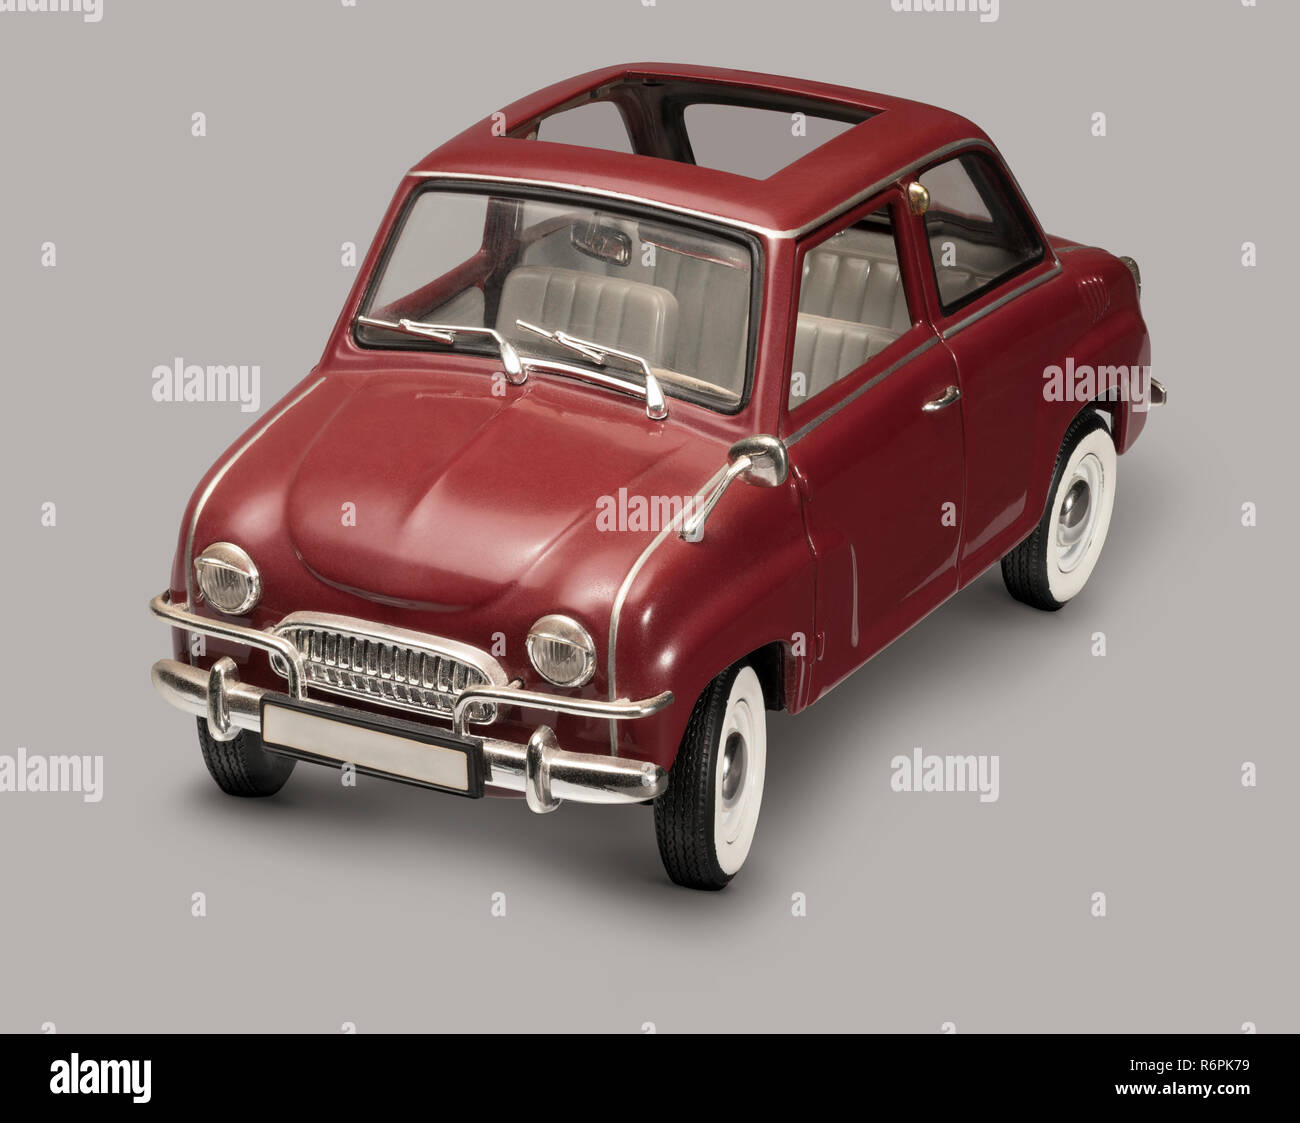 historic red microcar Stock Photo